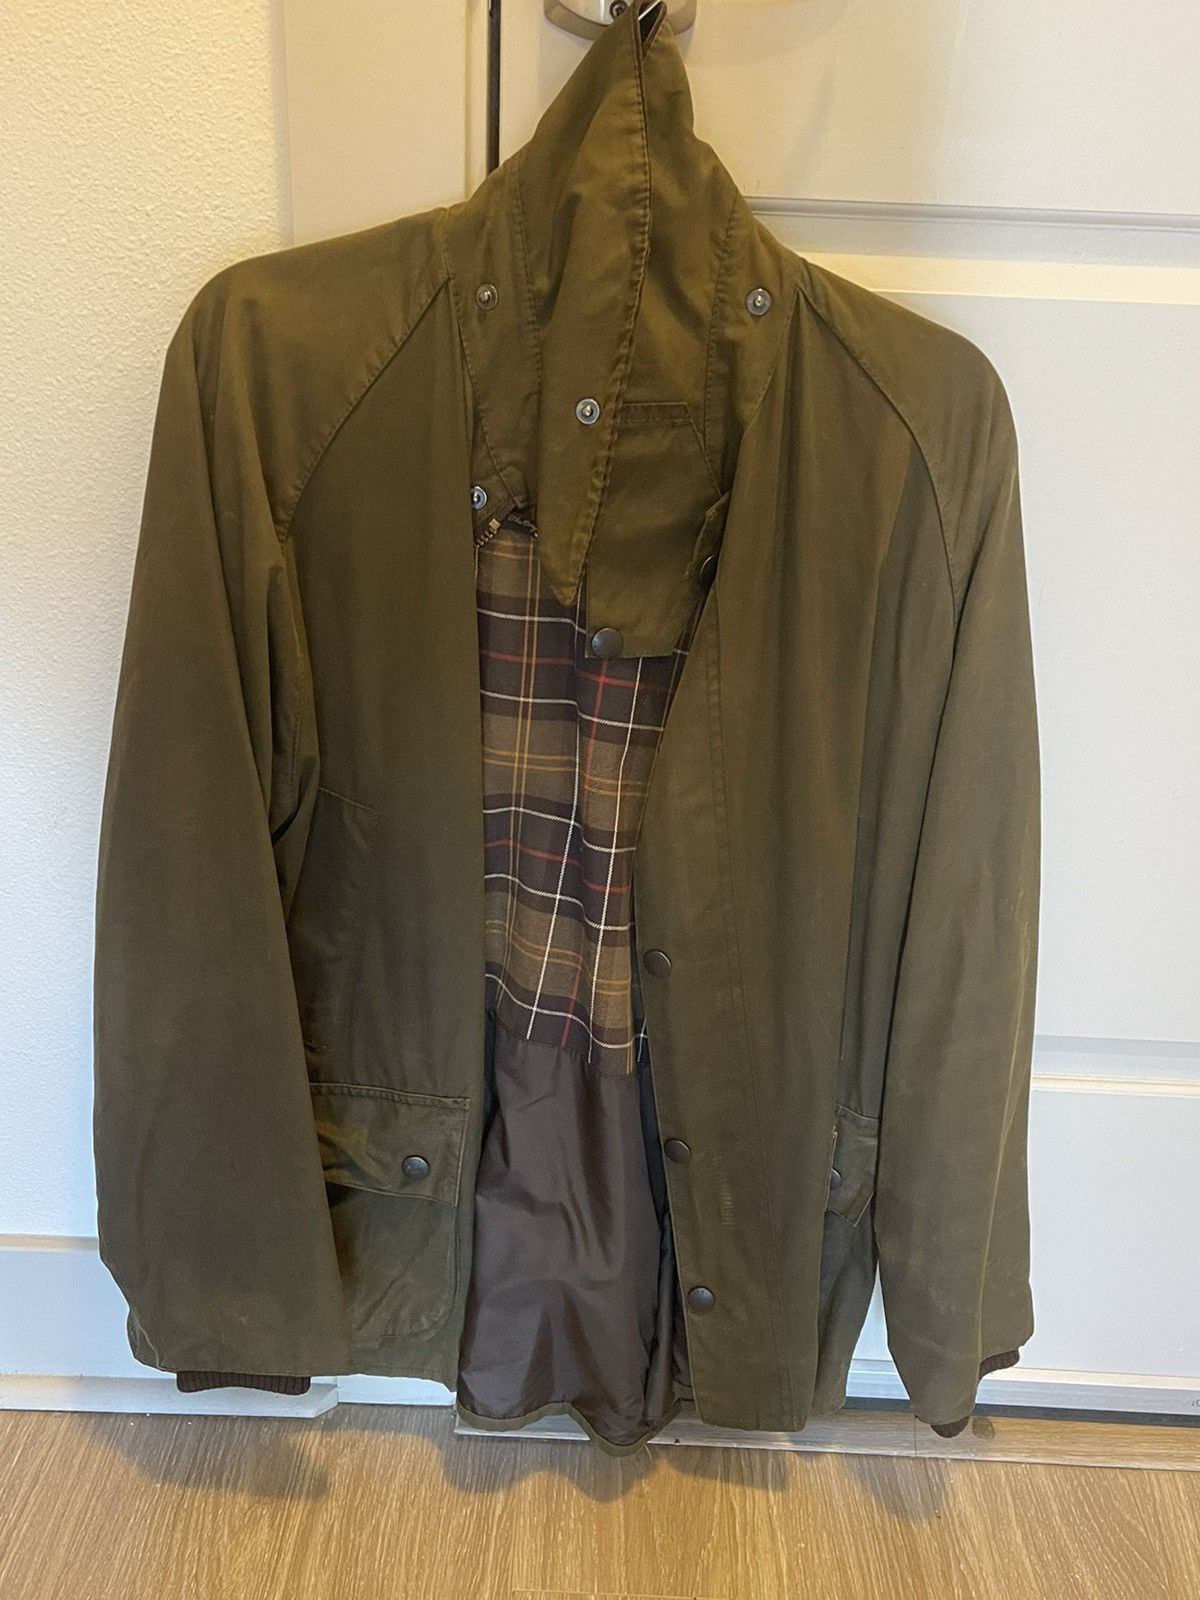 Barbour 🐕🦌🐎Barbour Classic Bedale Jacket 🐎🐕🦌 | Grailed